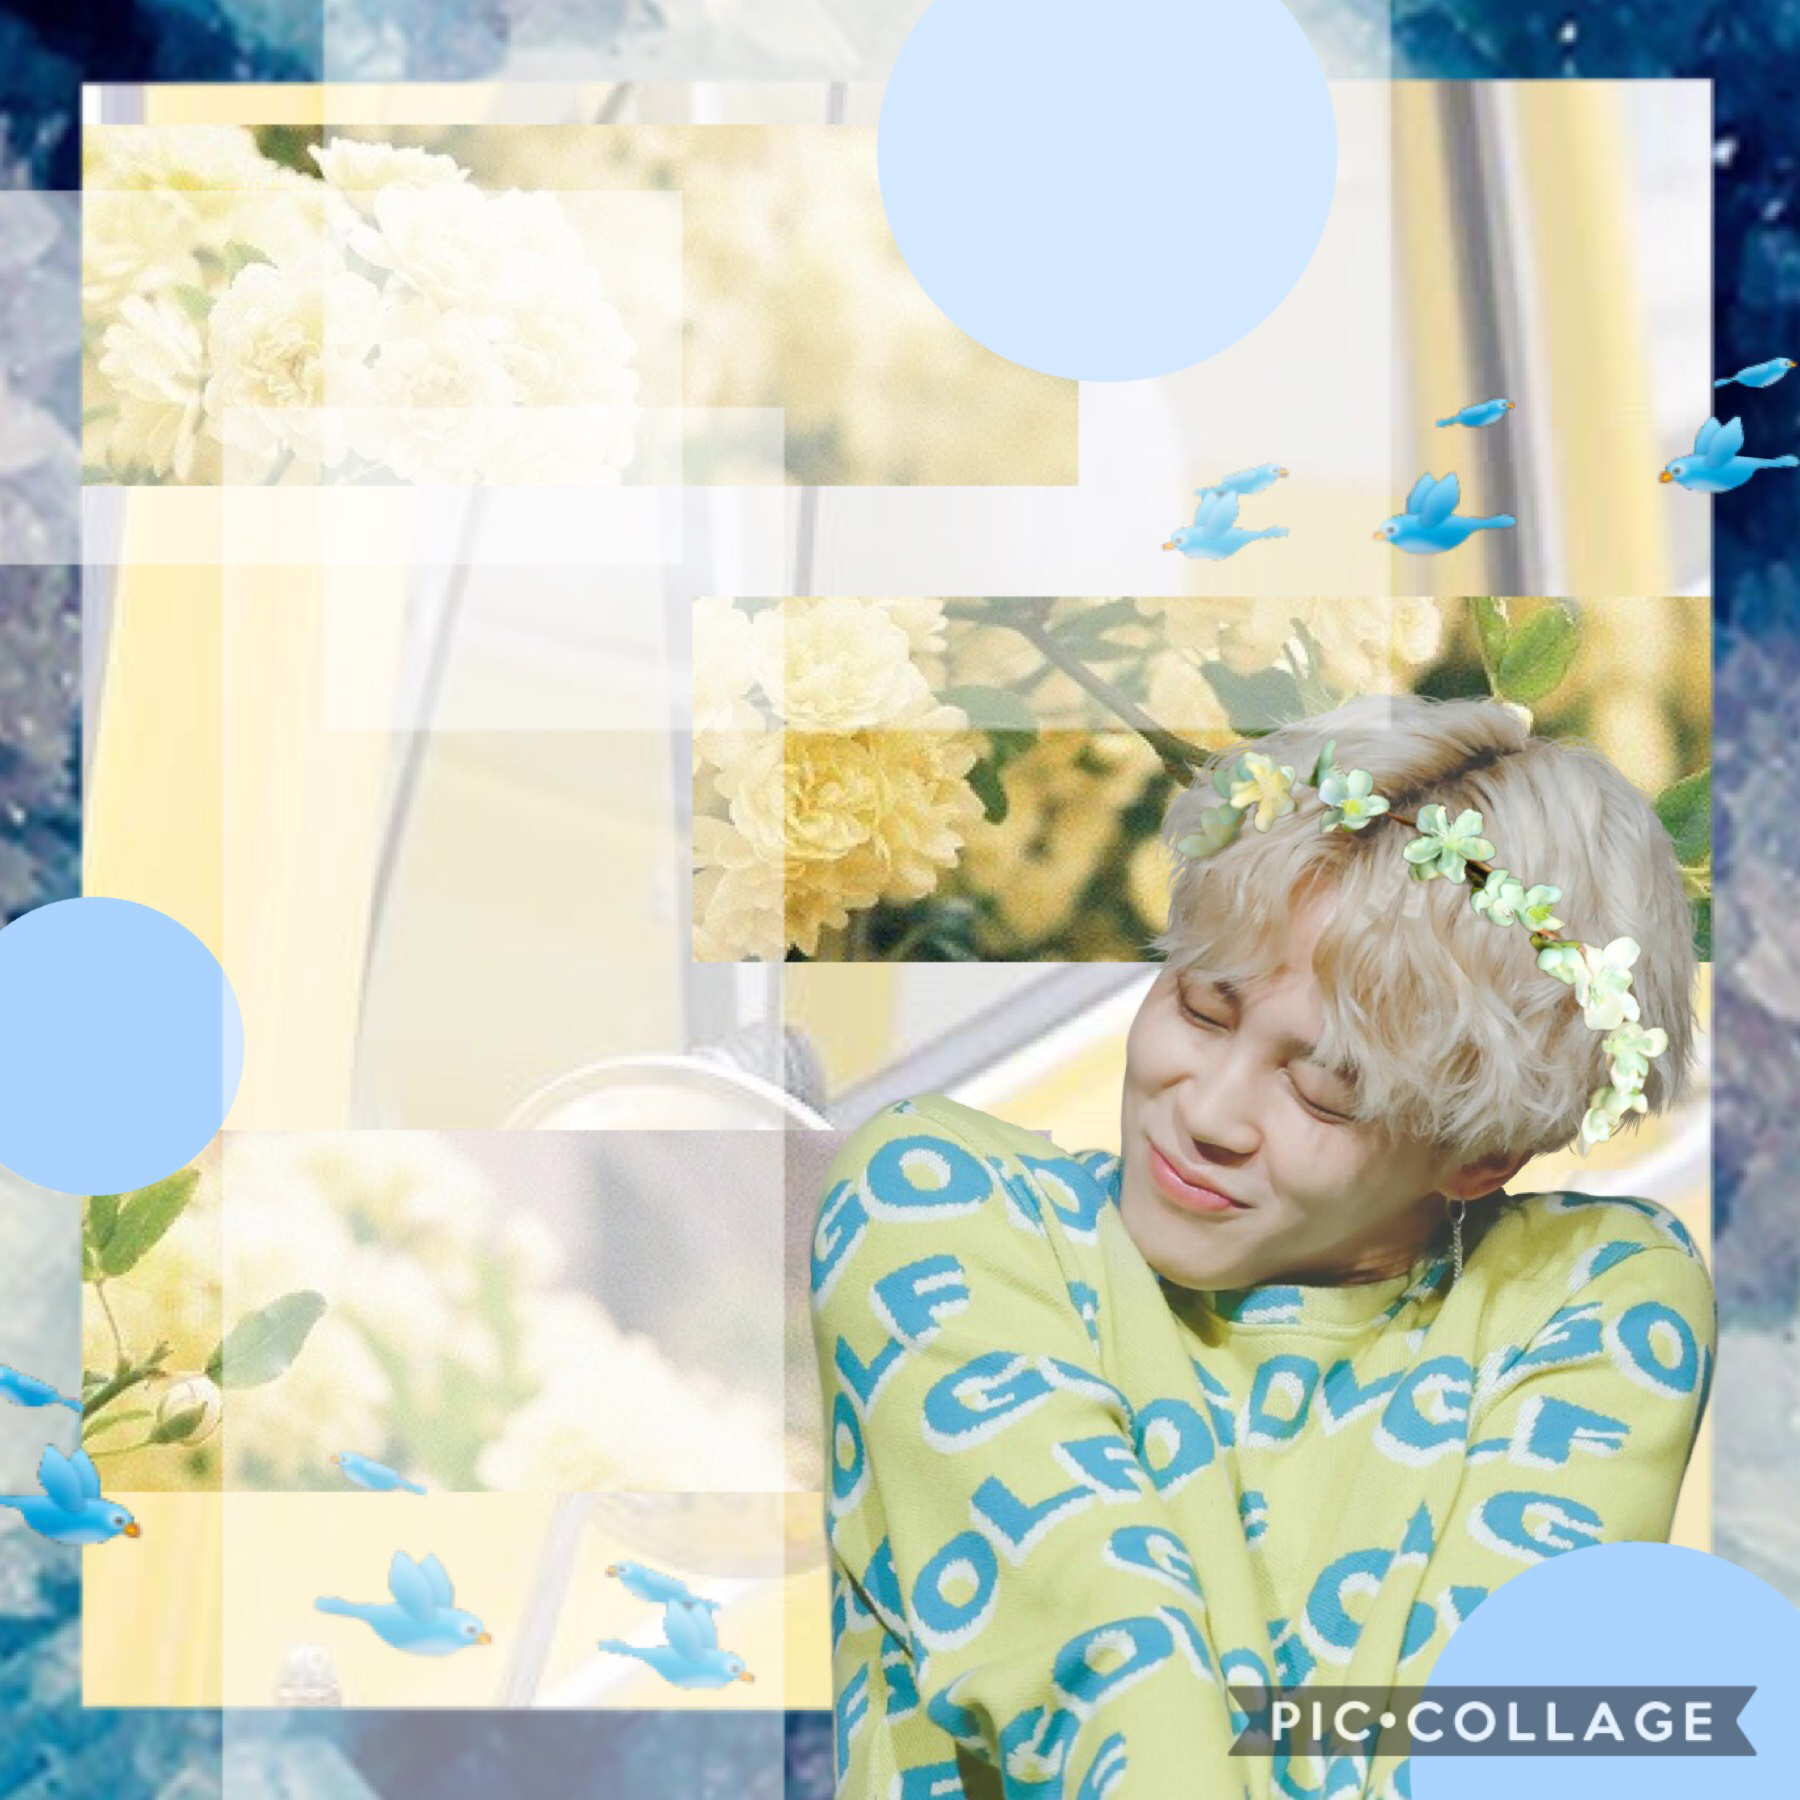 -poke-

So my Grandpa died today and so I thought I would do a happy edit to lift my spirits up. Jimin was the first person who came to mind and so I figured I should do one of him to make me feel happier and honestly it did make the tears stop